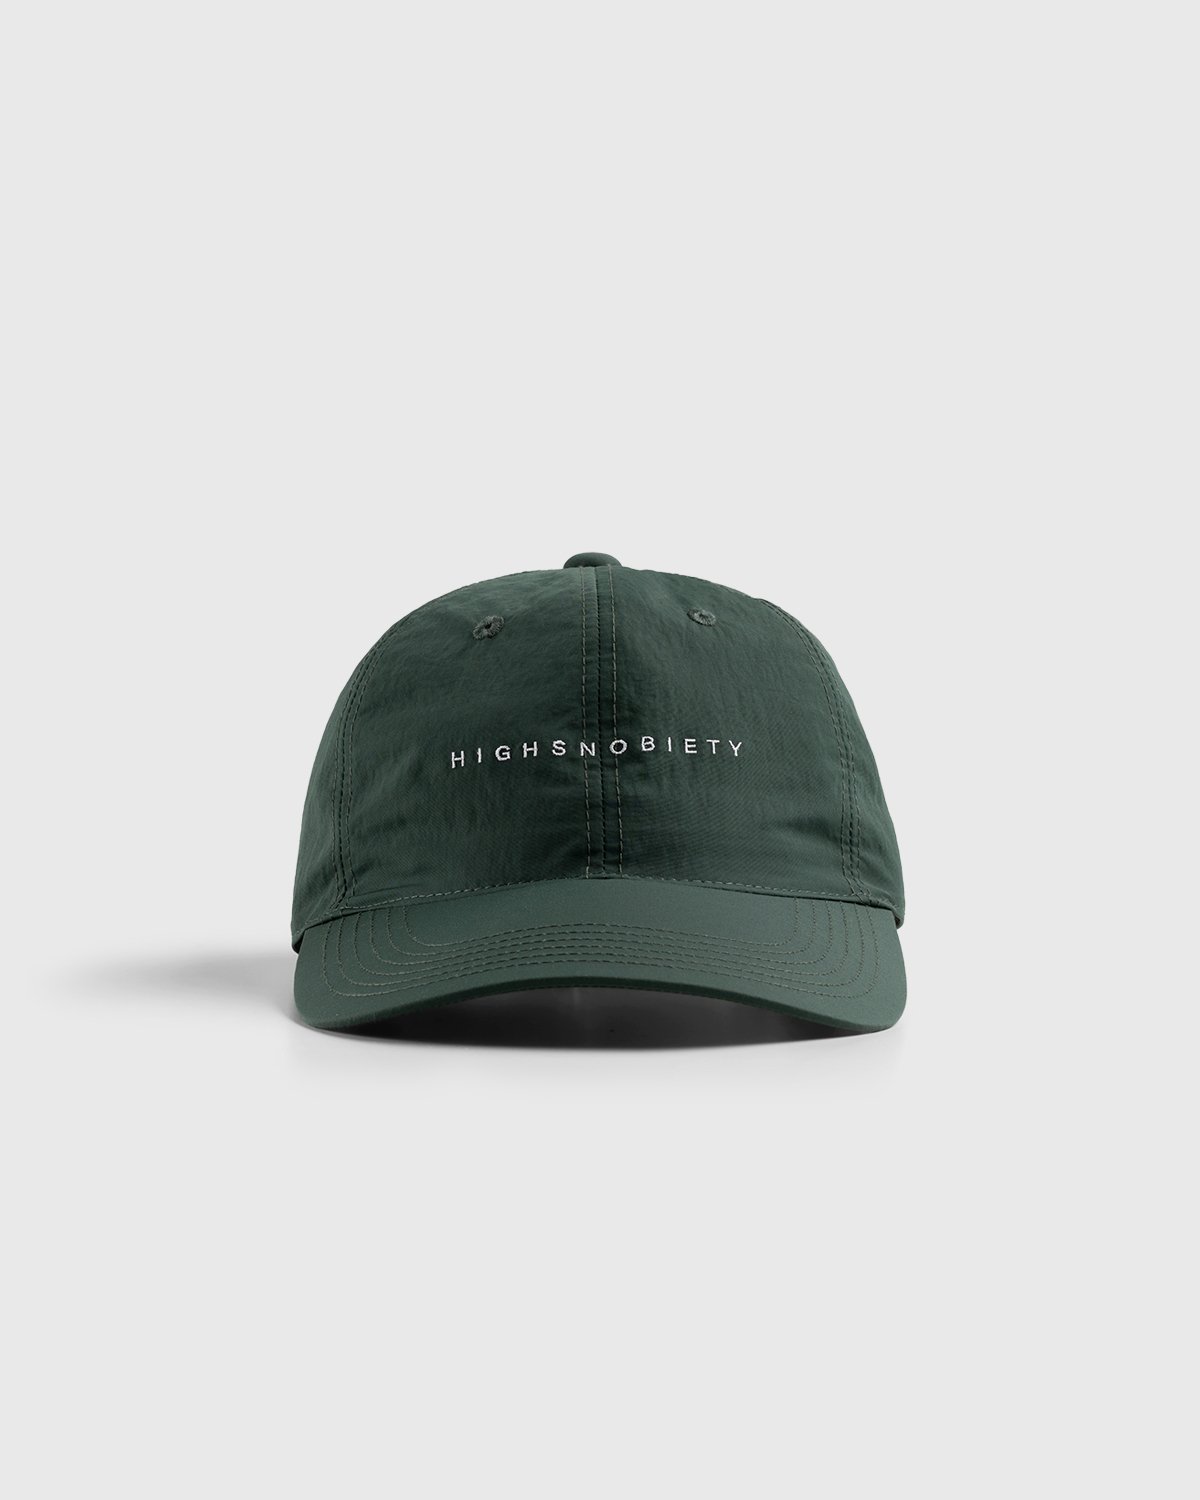 Highsnobiety - Brushed Nylon Ball Cap Green - Accessories - Green - Image 2